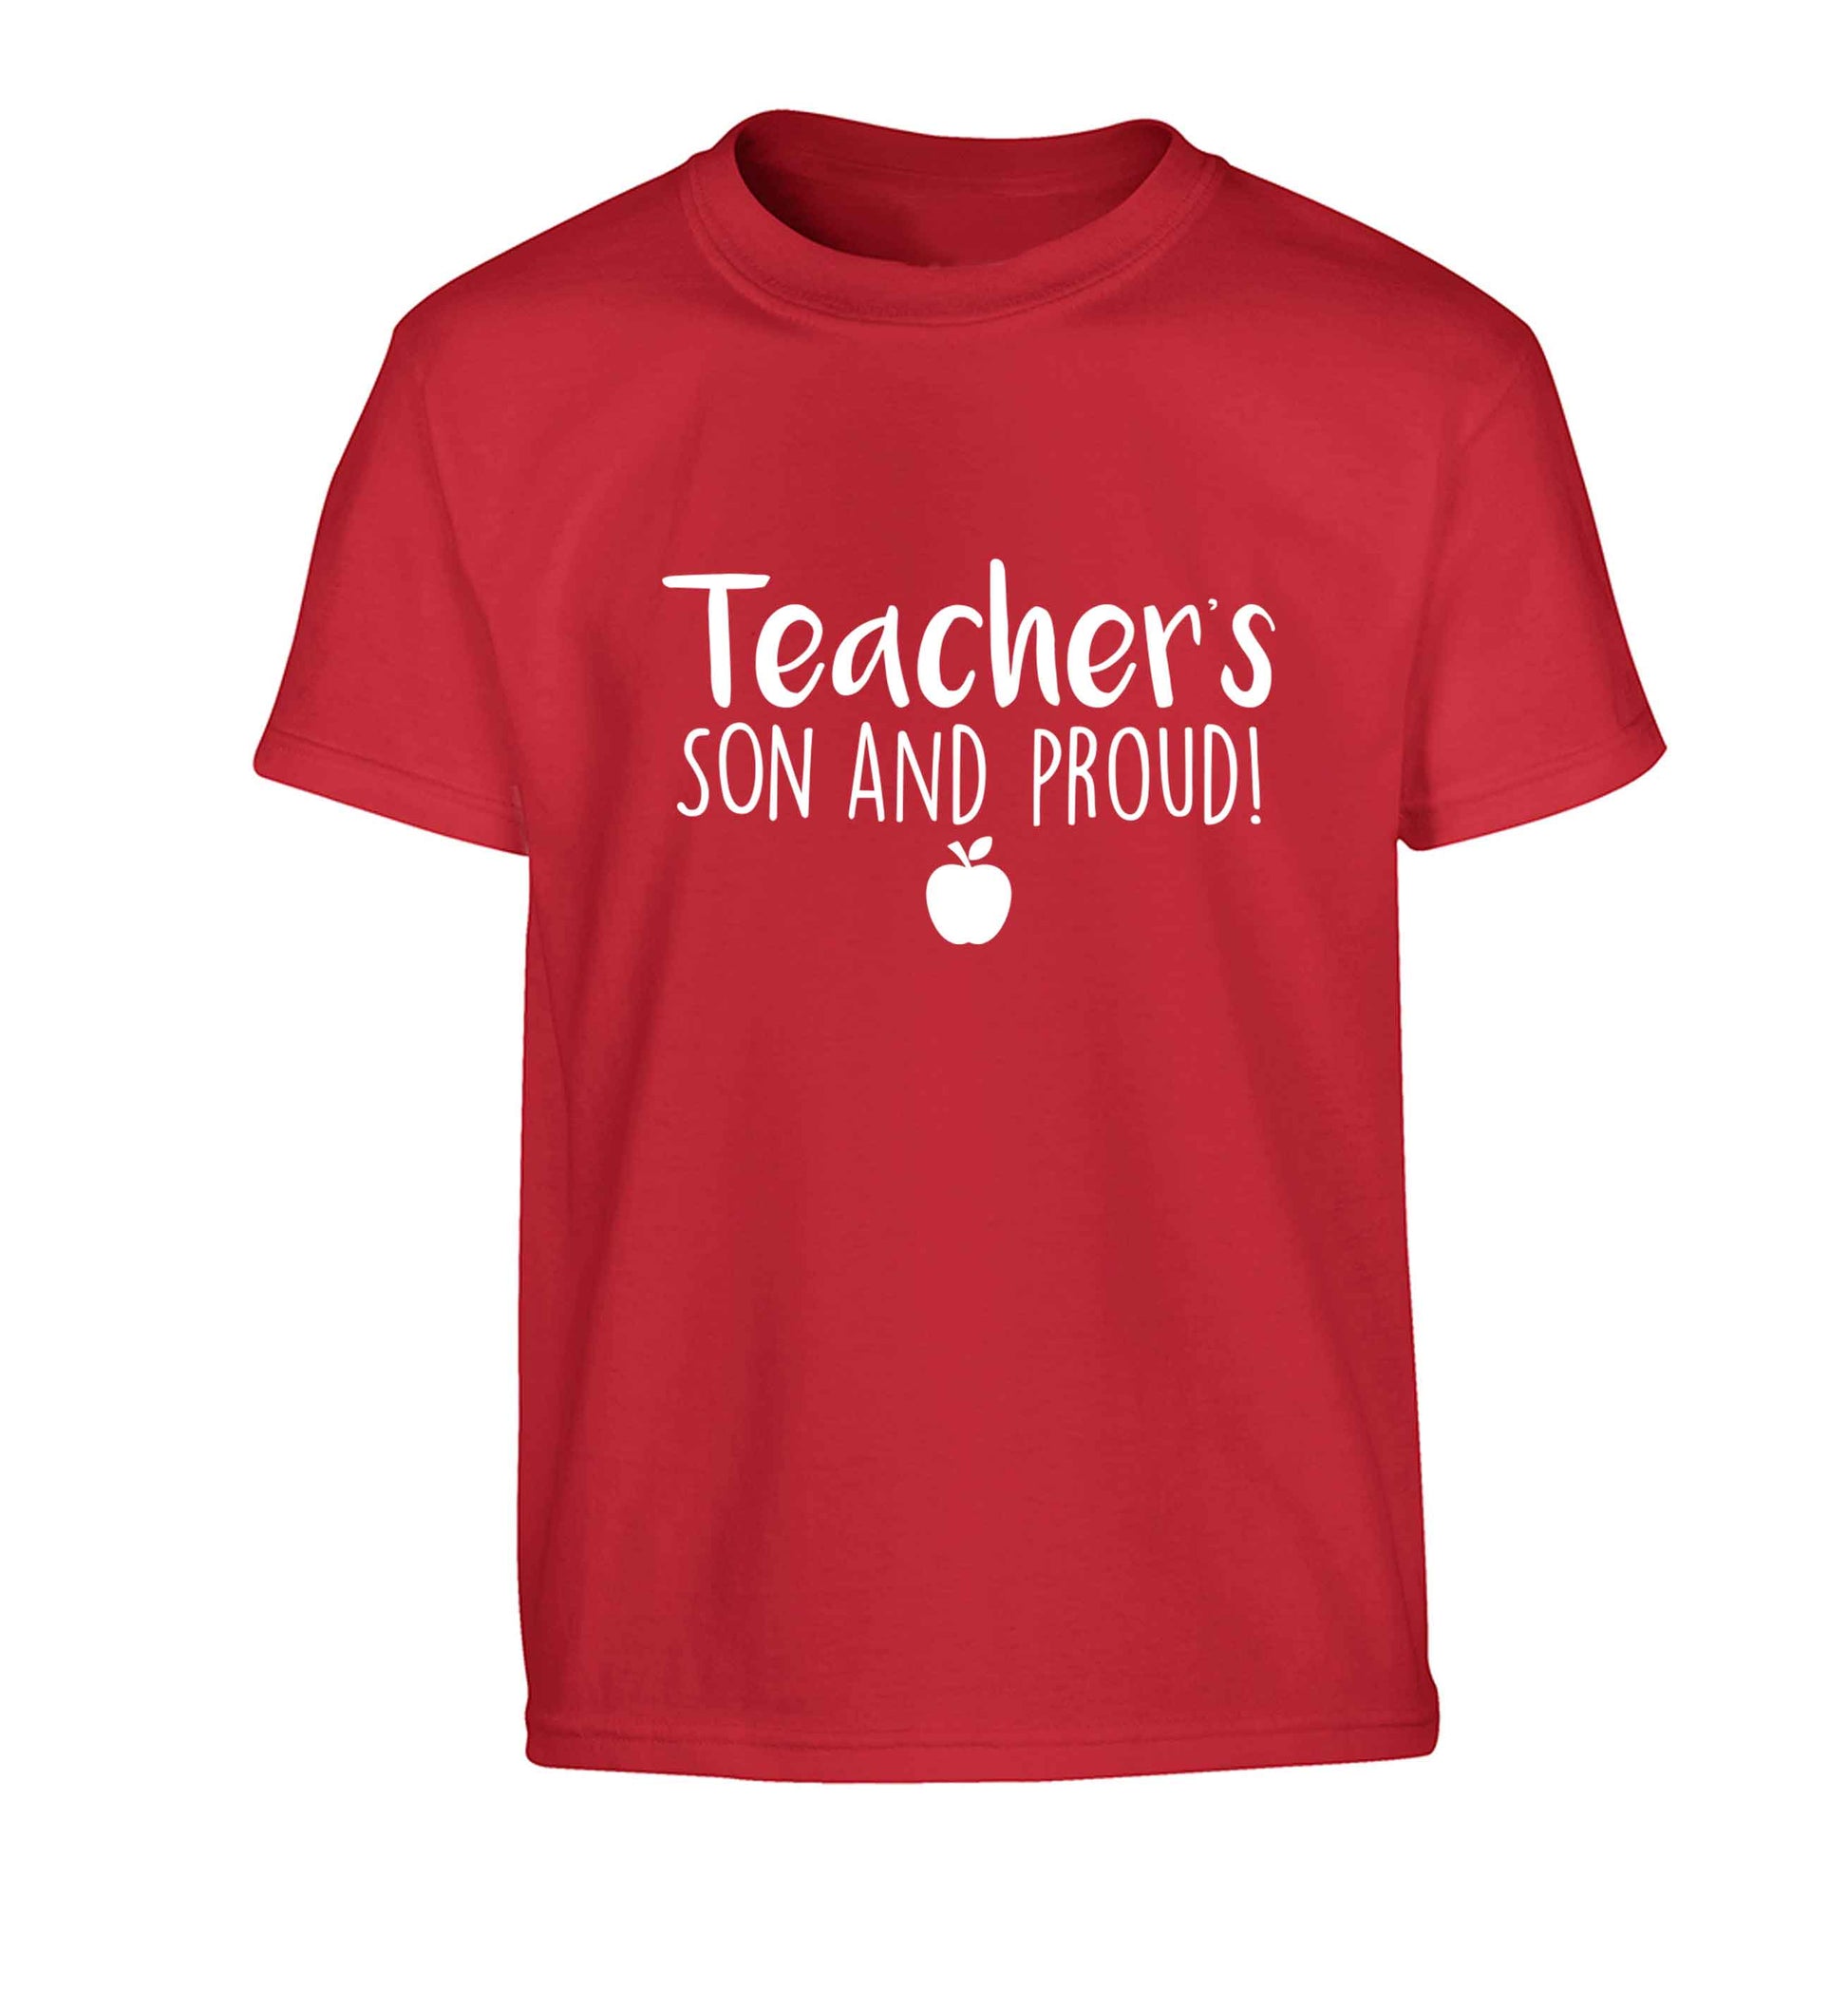 Teachers son and proud Children's red Tshirt 12-13 Years